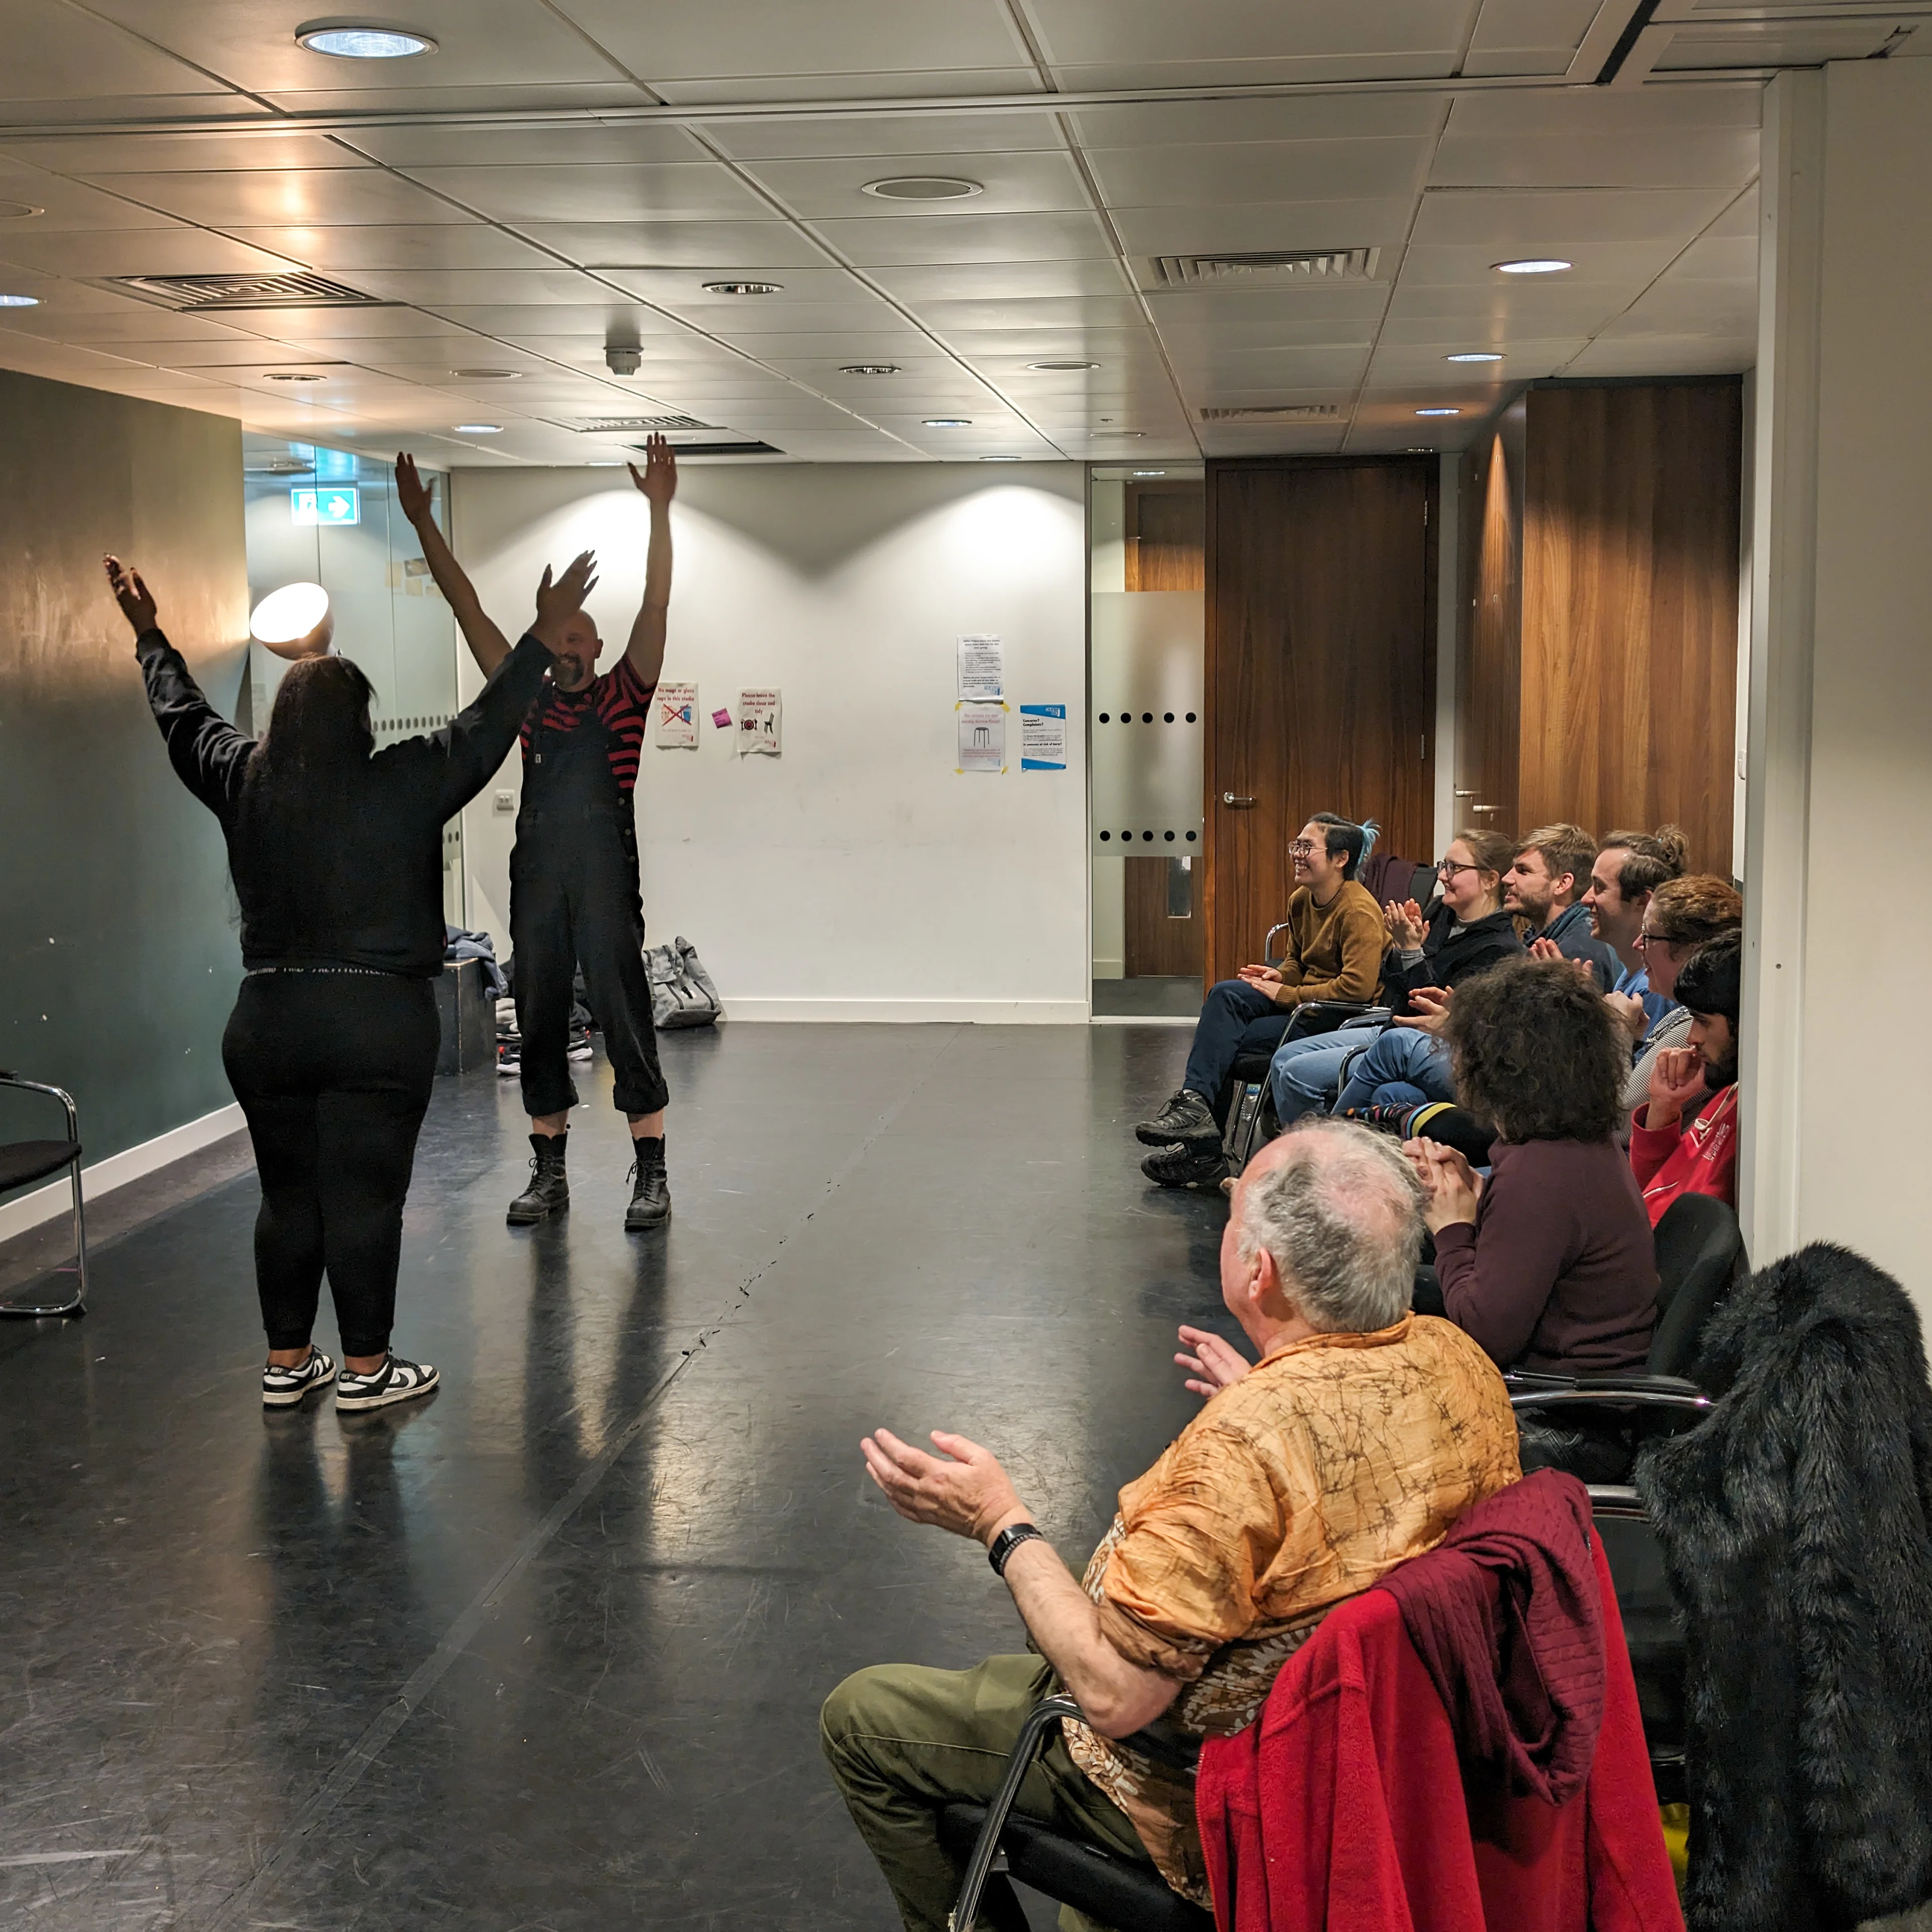 Clowning workshop with participants with their arms in the air 